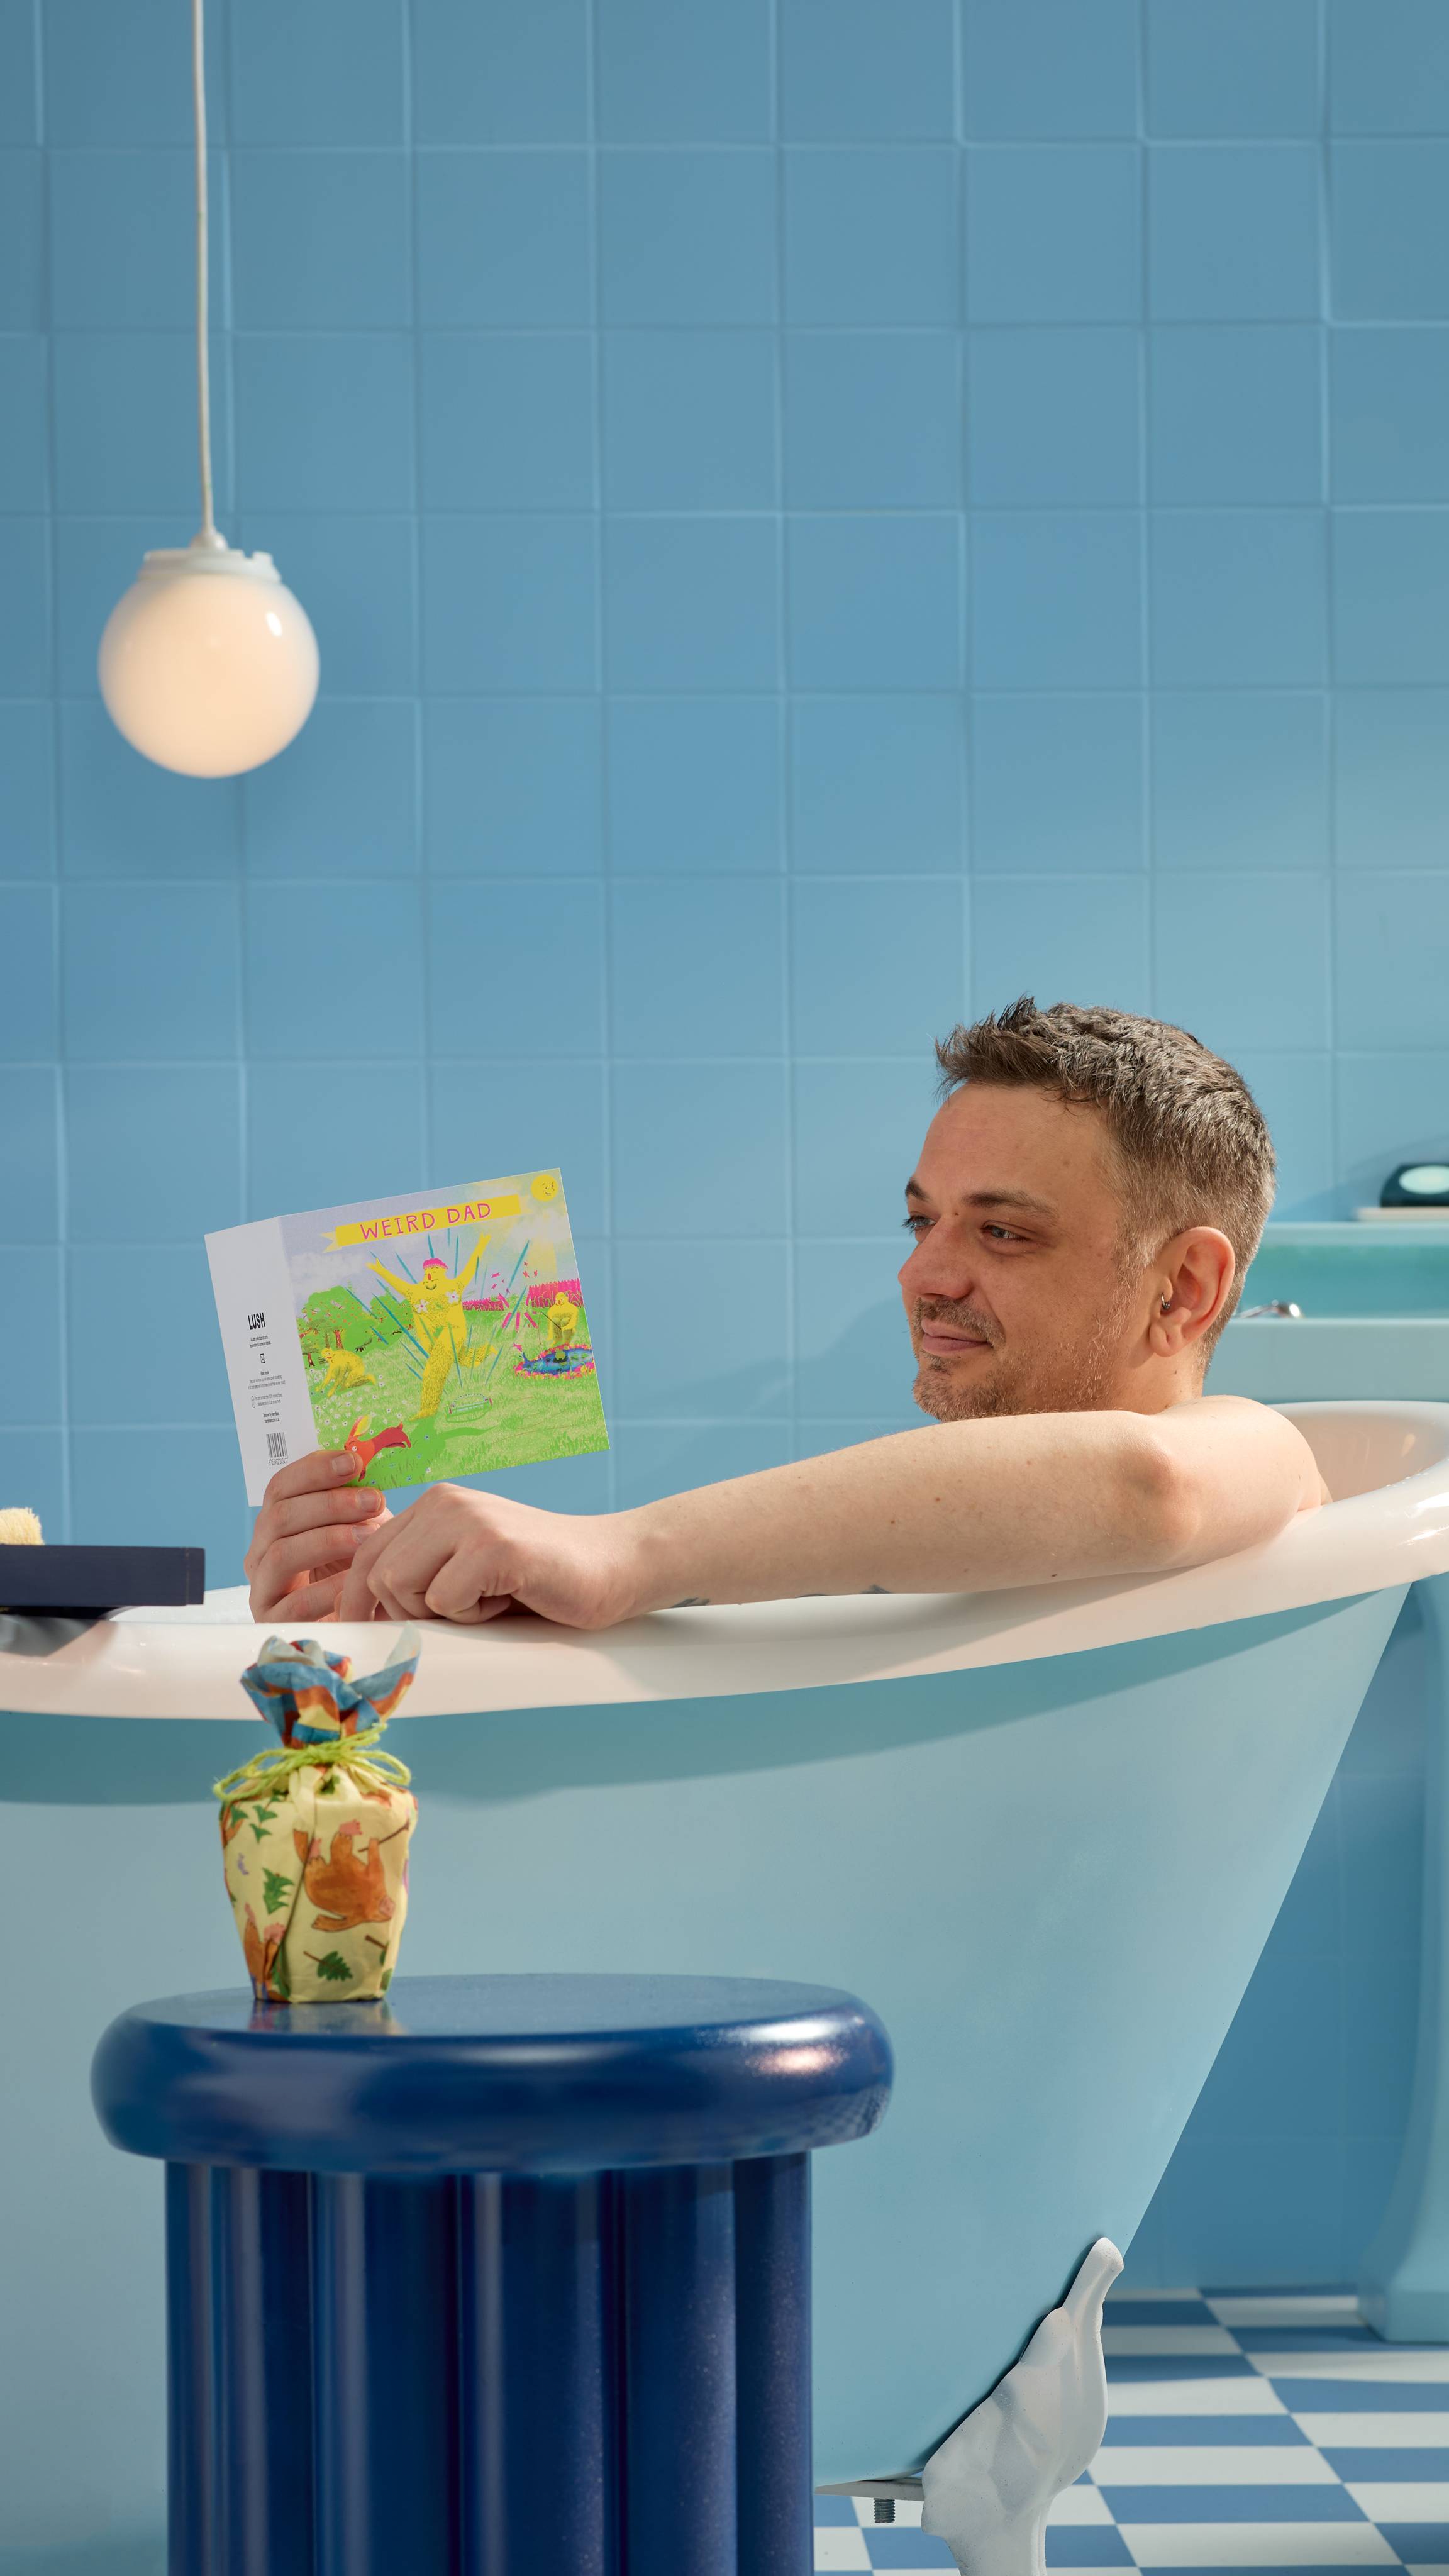 The model is sitting in a roll-top bathtub in a blue, tiled room reading the Weird Dad gift card as a wrapped gift is sat on a blue stool beside the bath. 